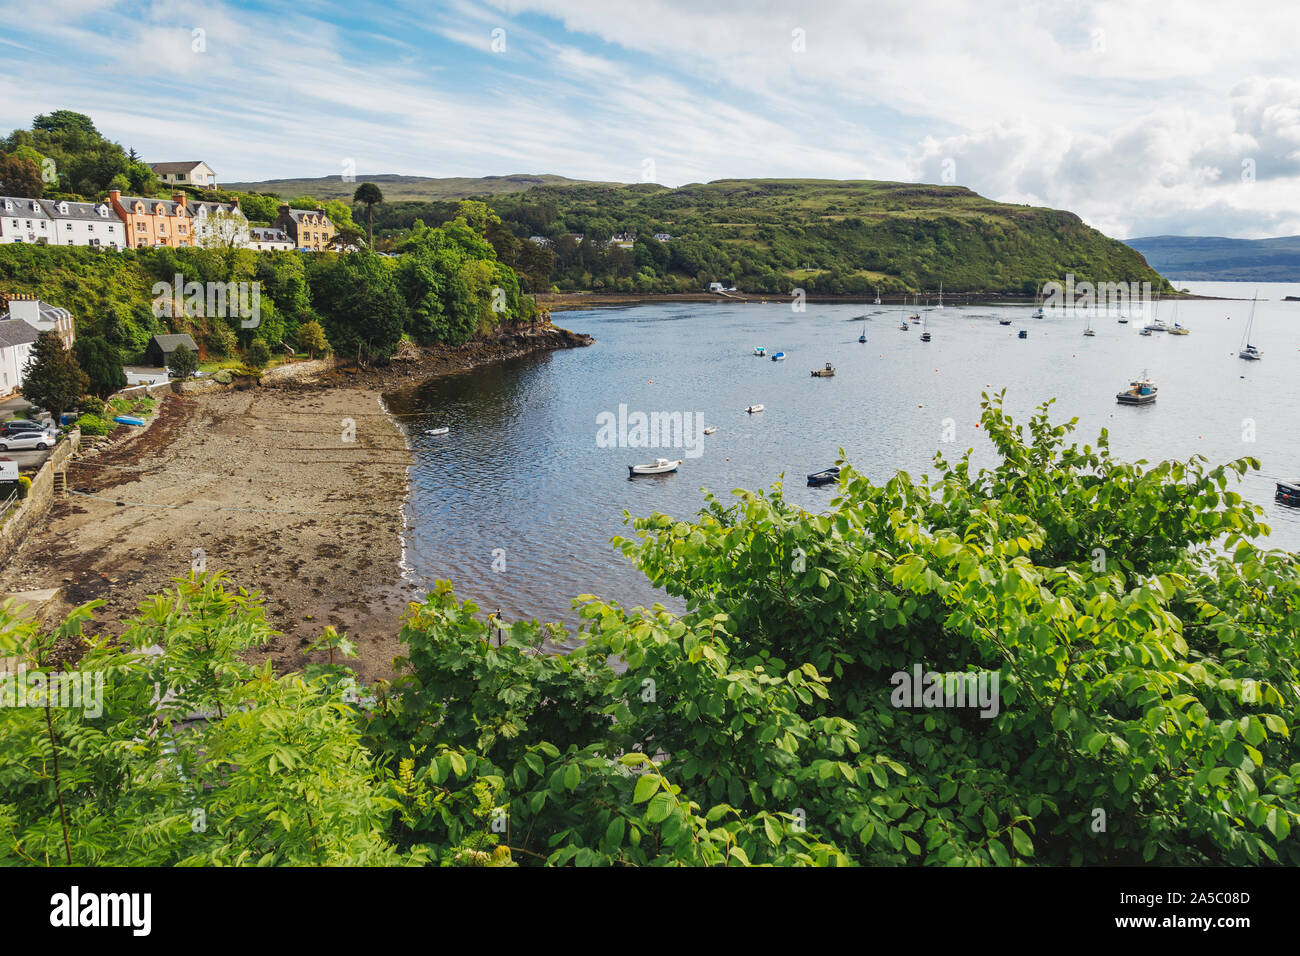 Boats moored in Portree Harbour, as seen from up on The Lump, a hill on the edge of Portree township, Scotland, UK Stock Photo